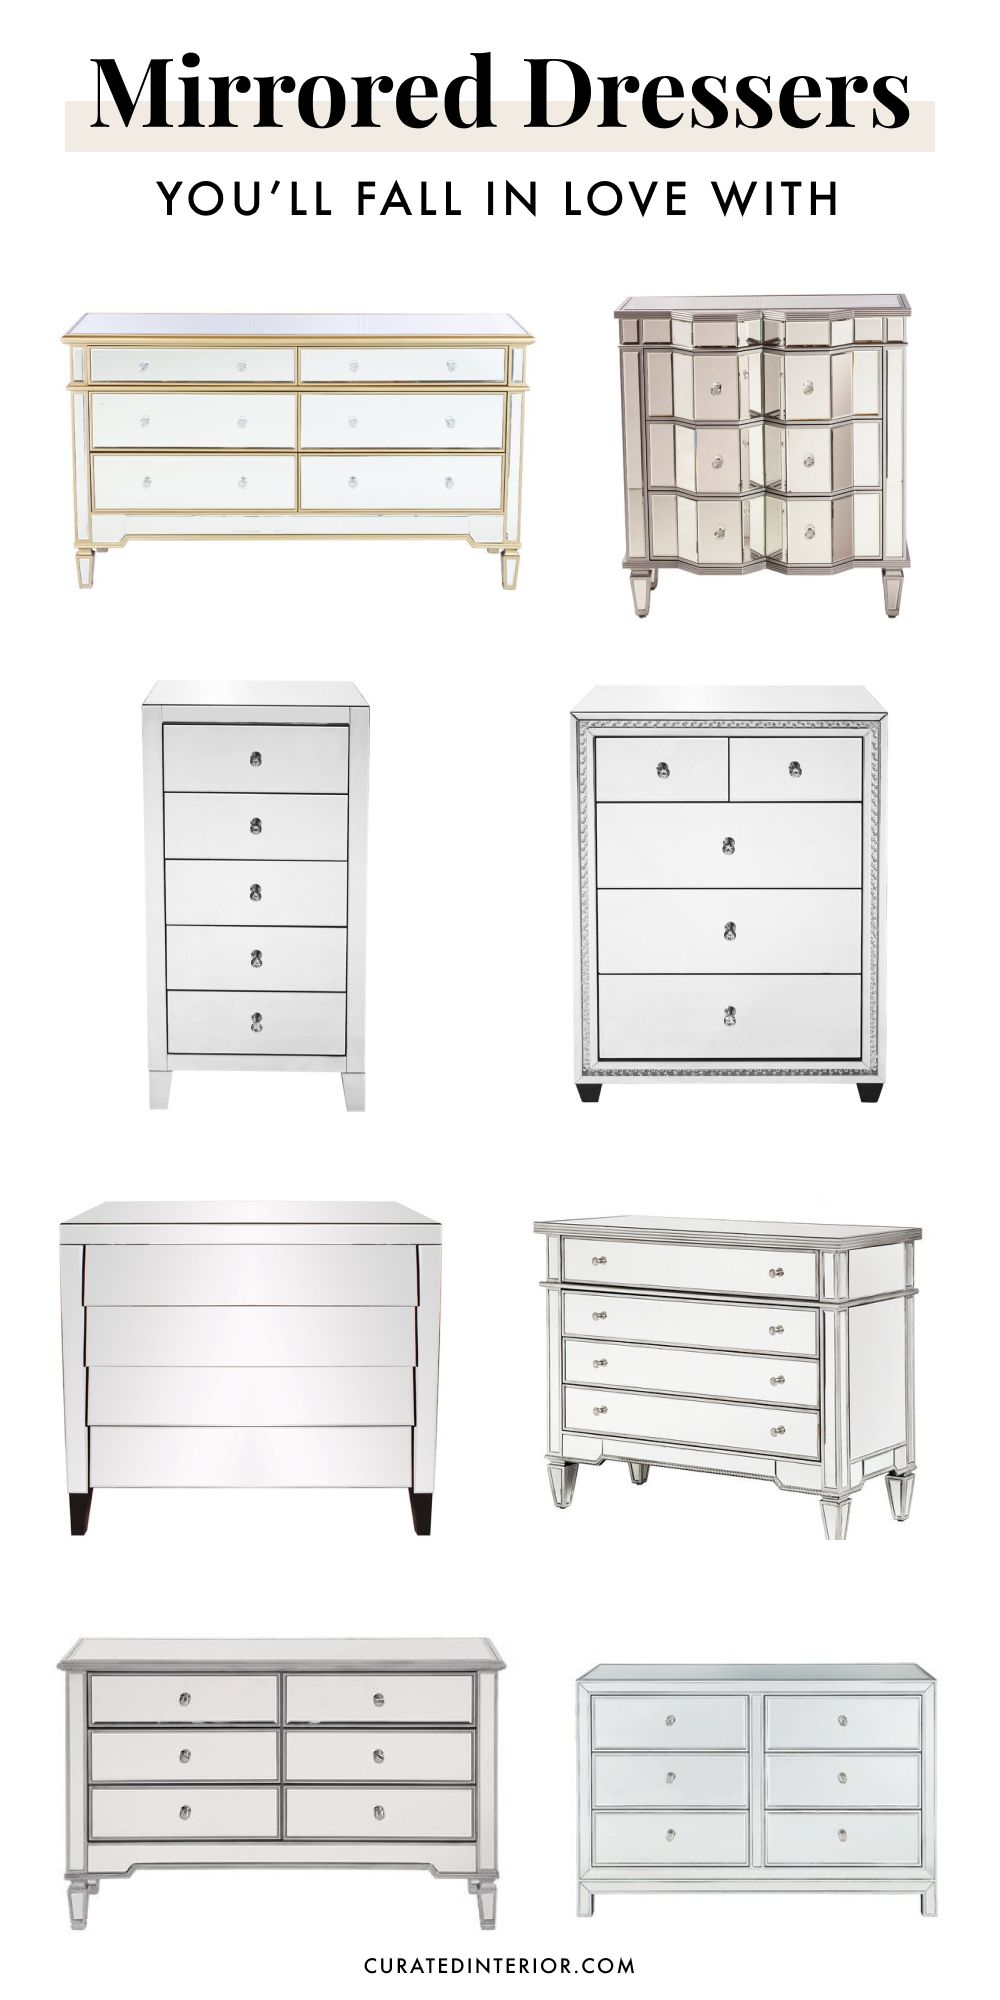 Mirrored Dressers You'll Love